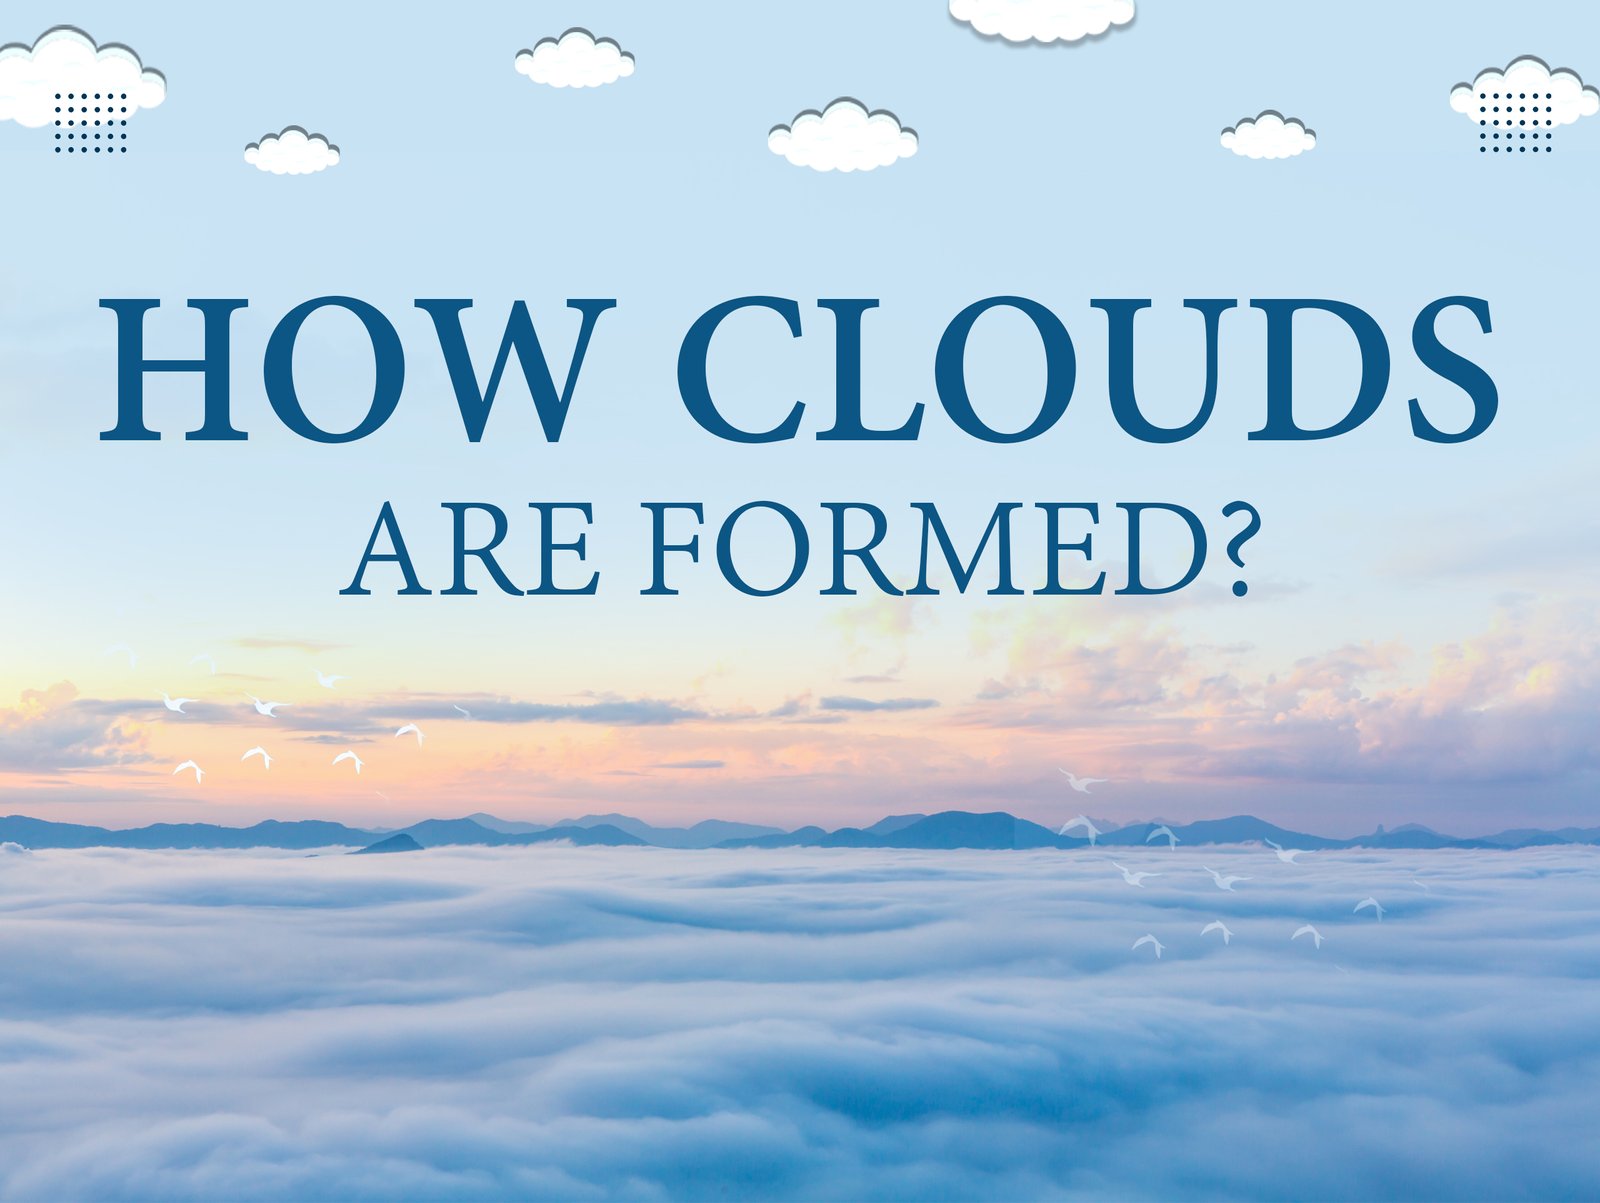 How clouds are formed poster